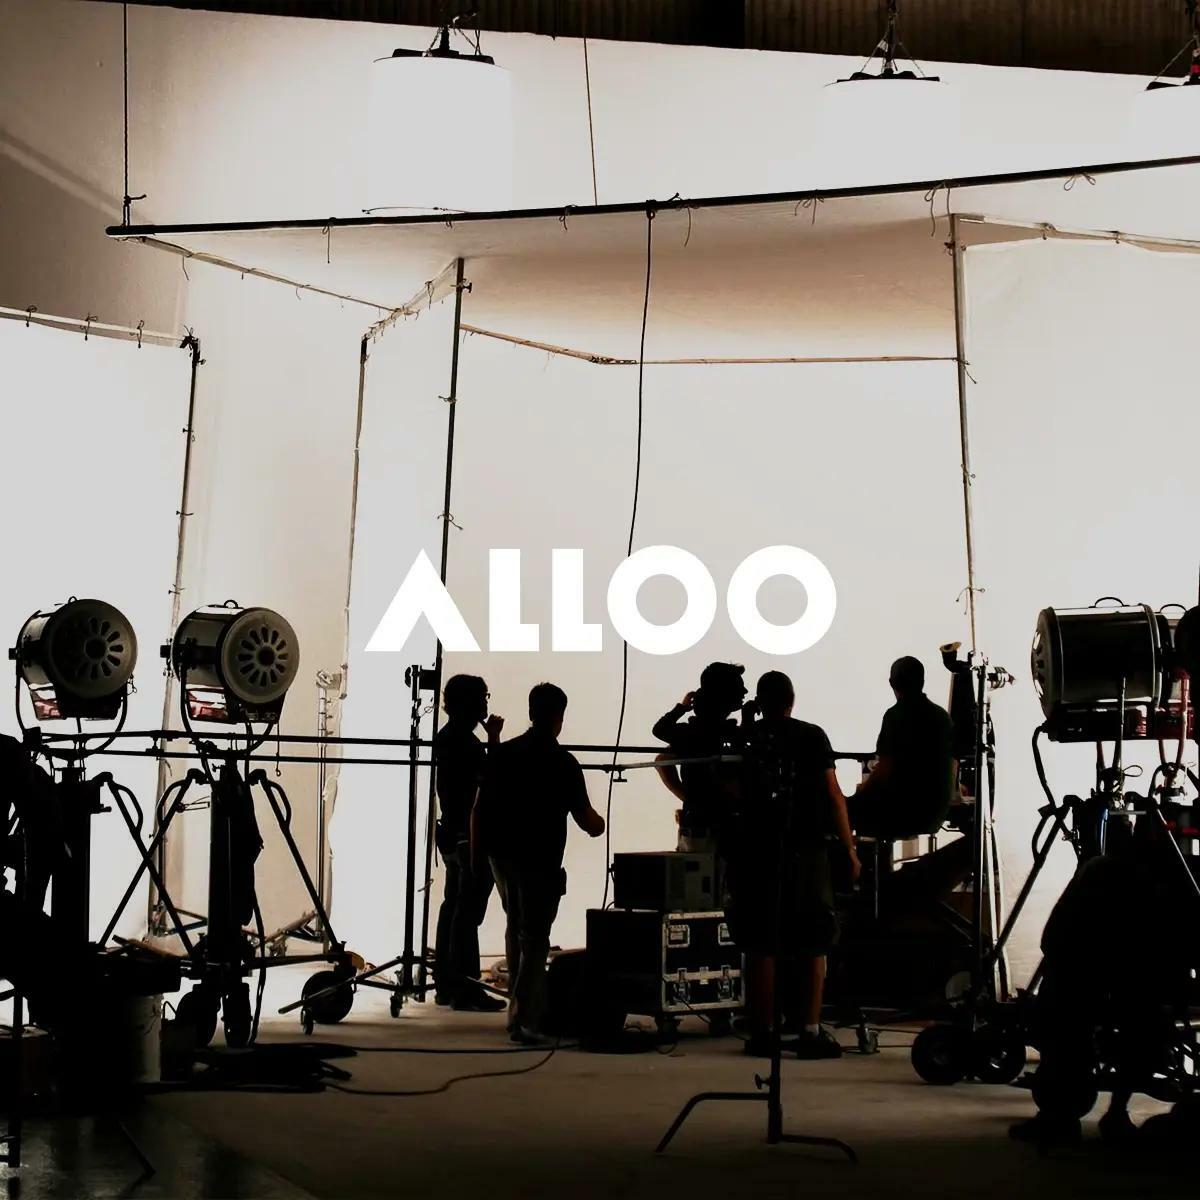 The new website for ALLOO GmbH